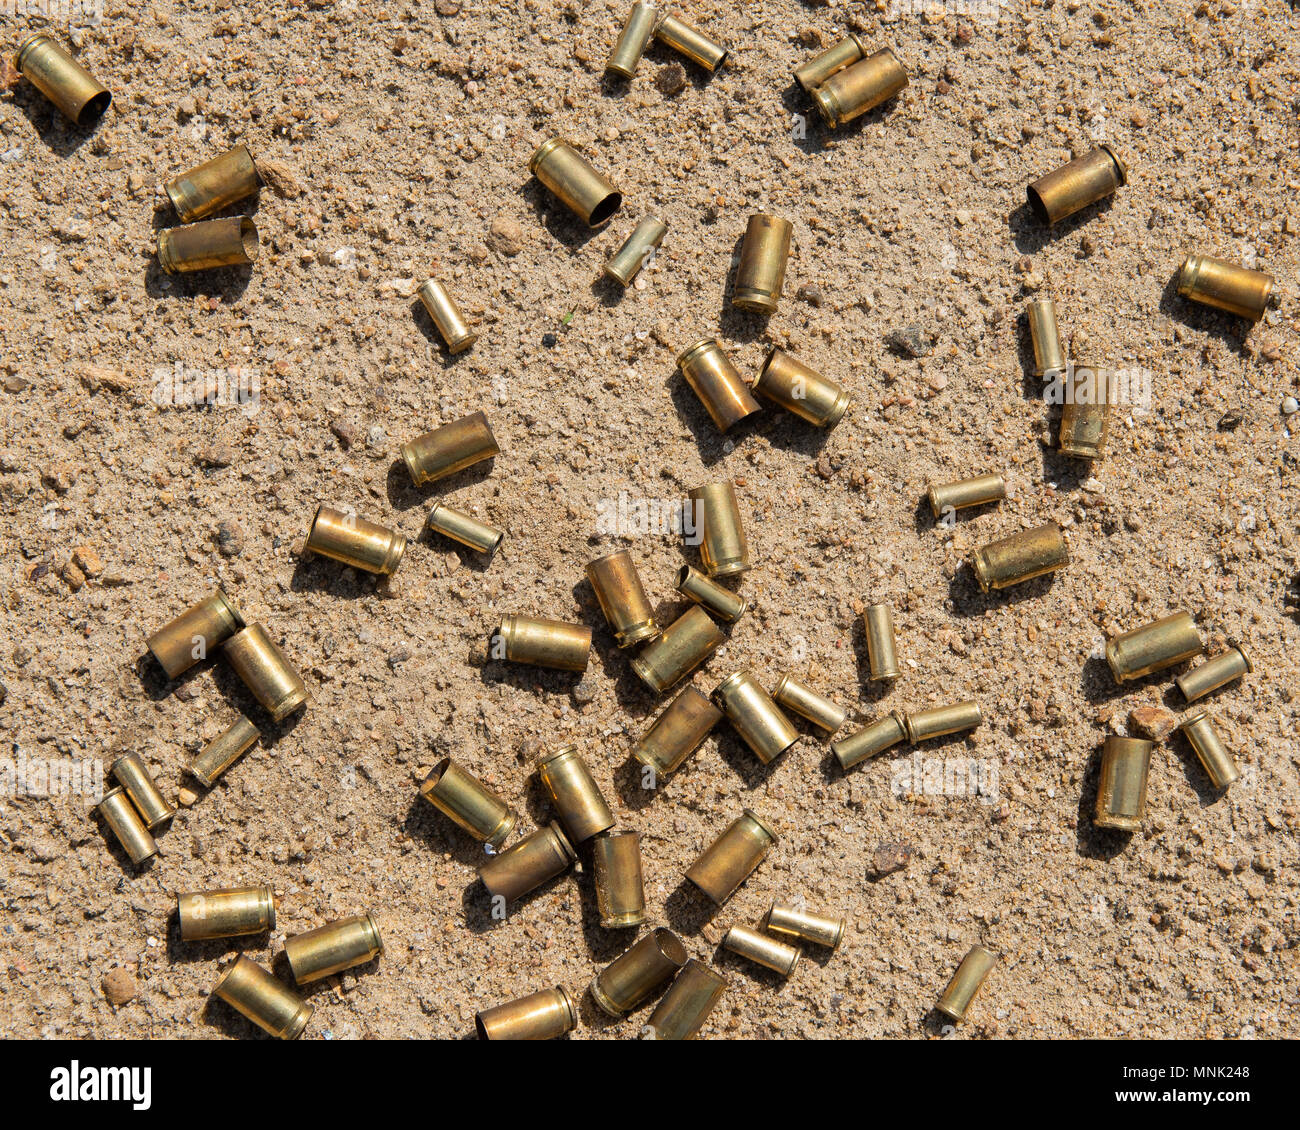 A fired bullet and cartridge case